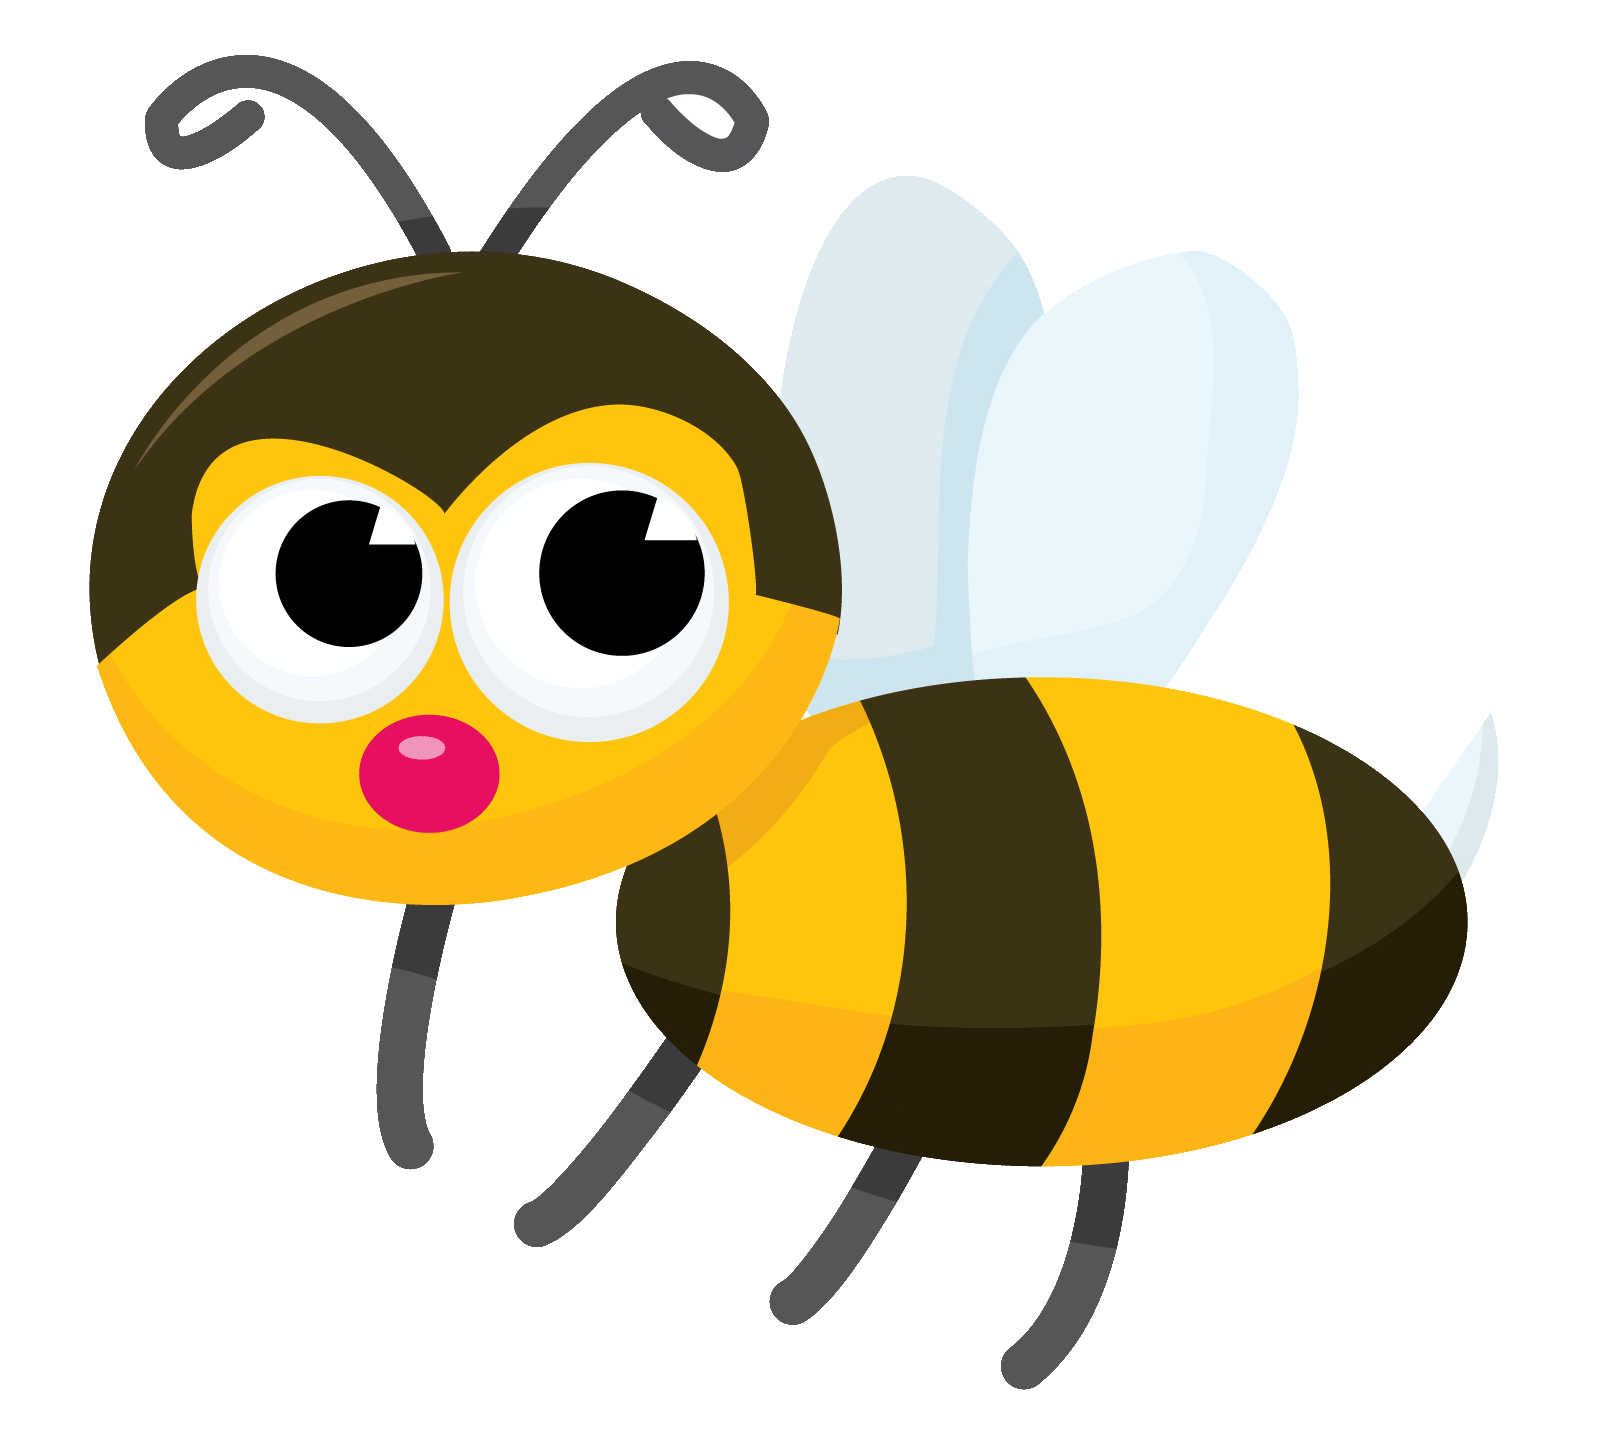 Free Bumble Bee Pictures Cartoon, Download Free Clip Art, Free